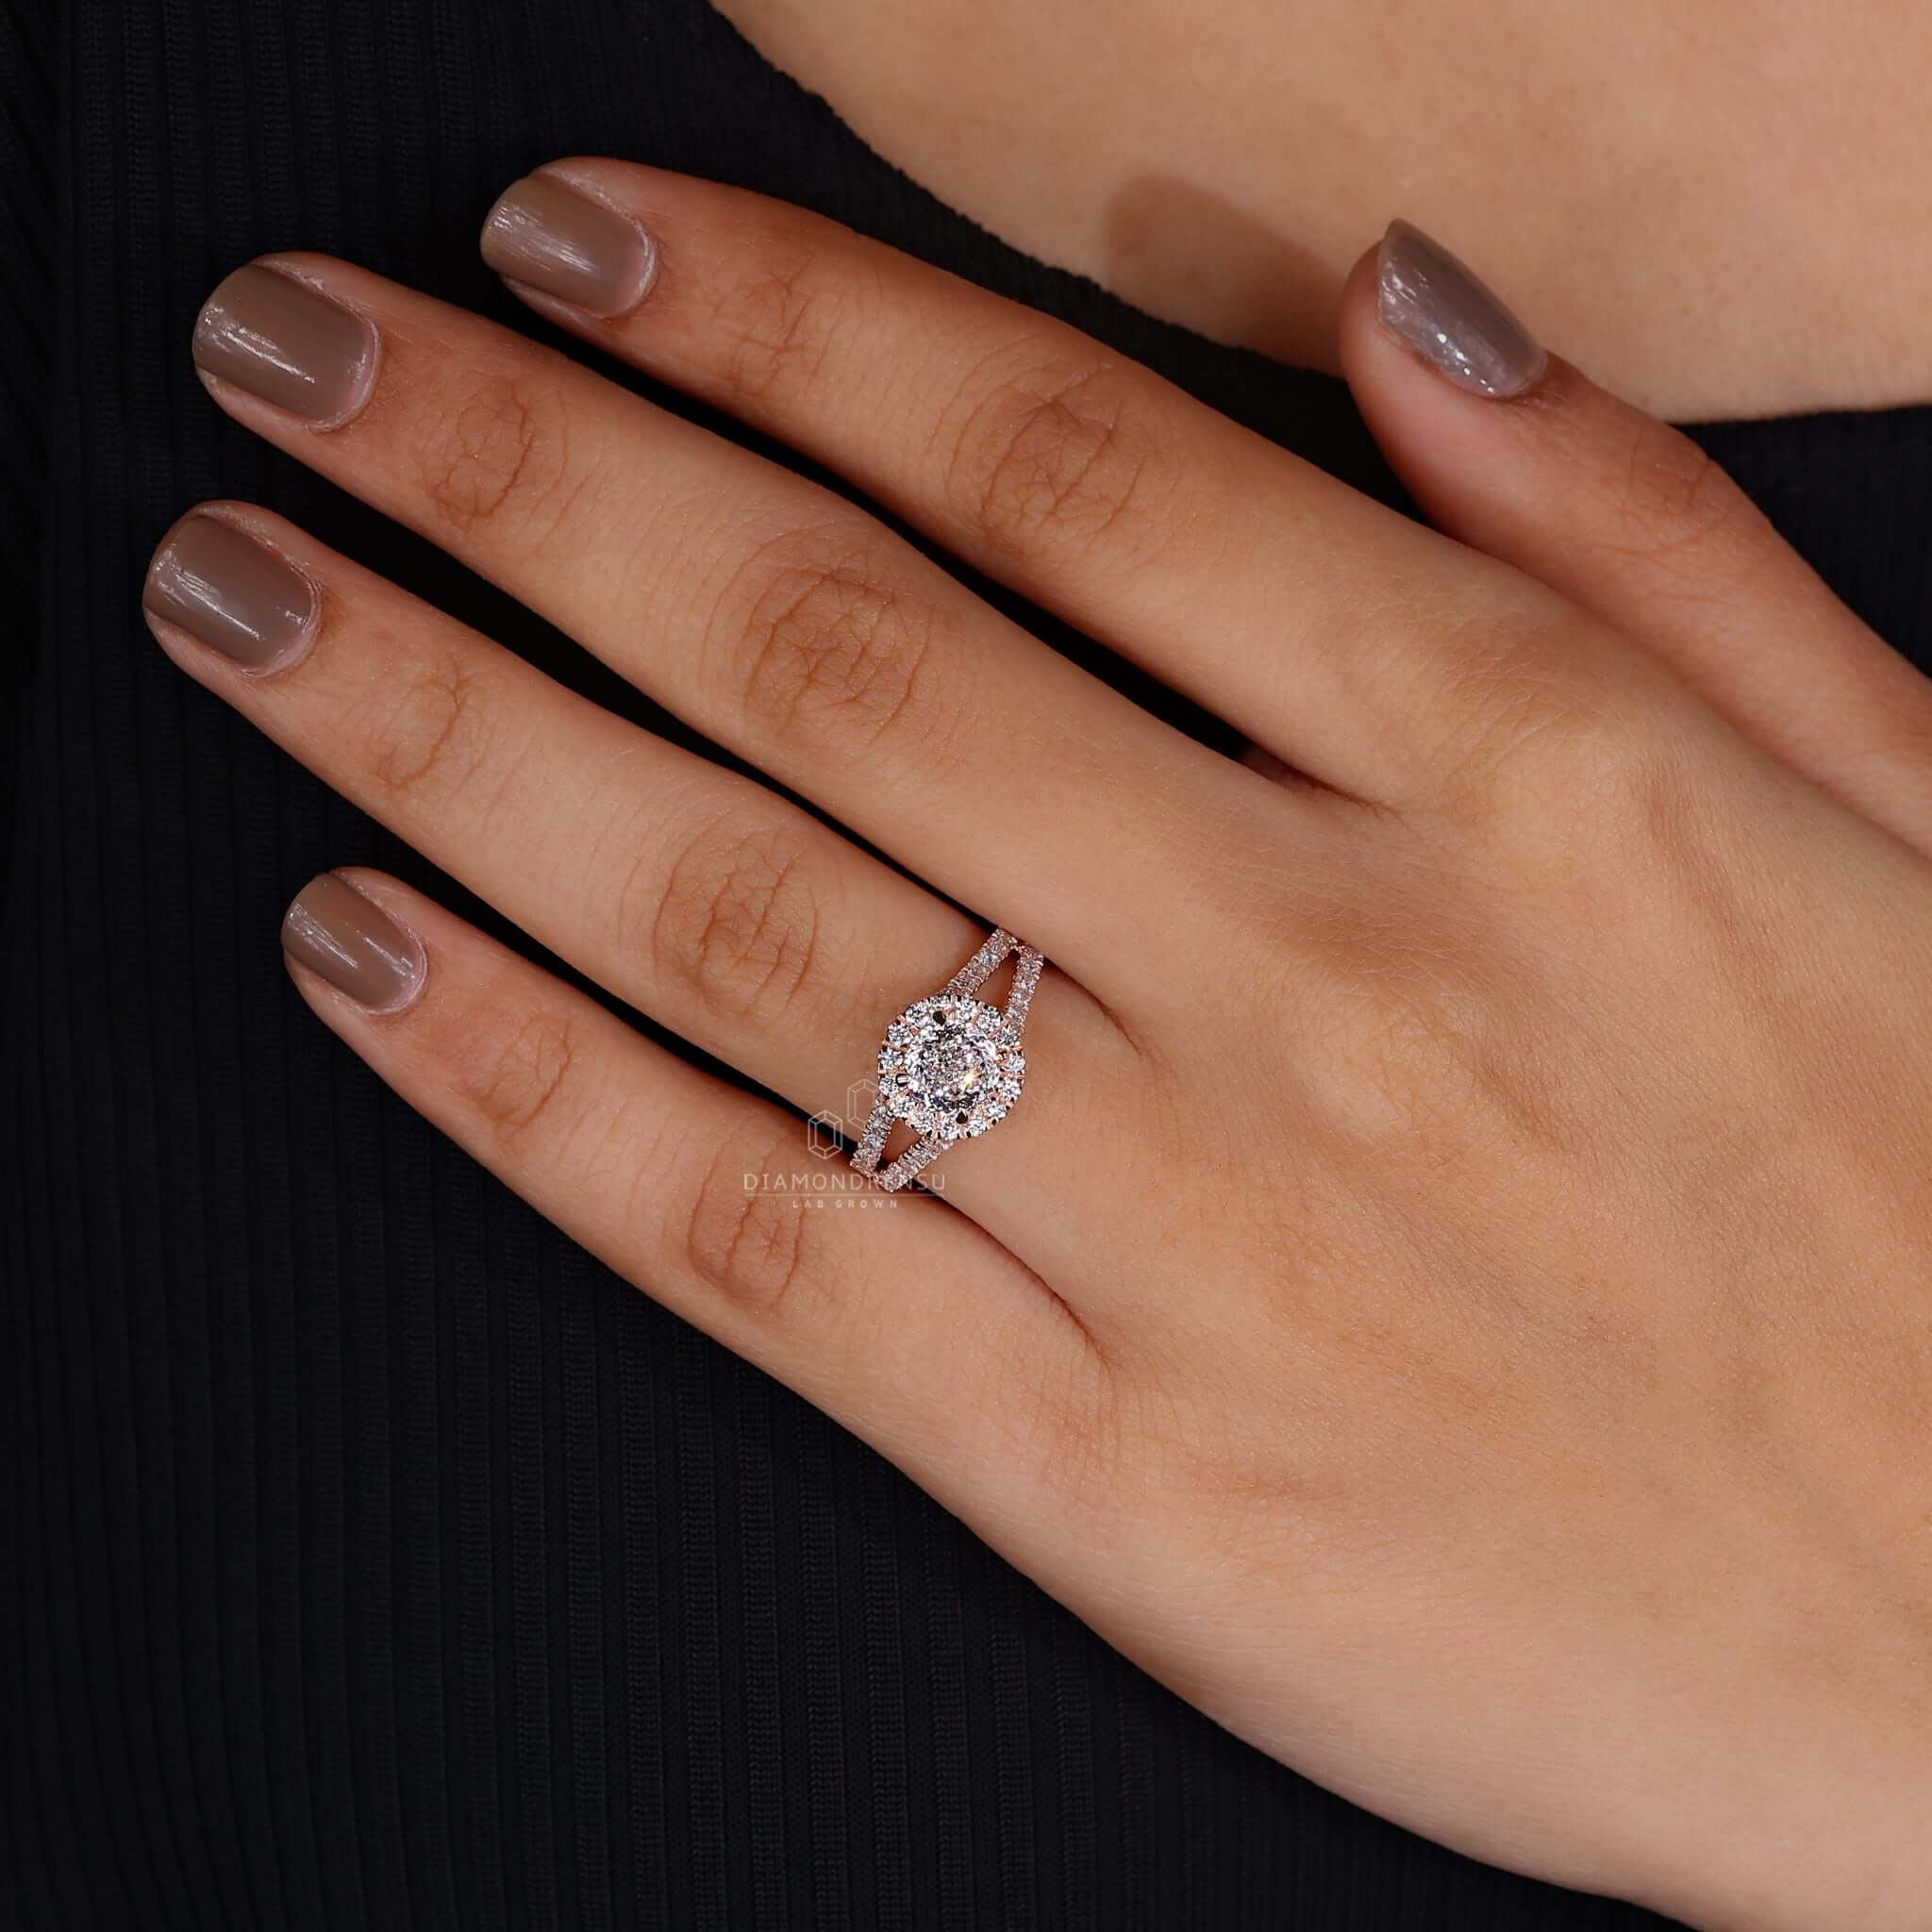 Woman's hand gracefully showcasing the vintage rose gold engagement ring